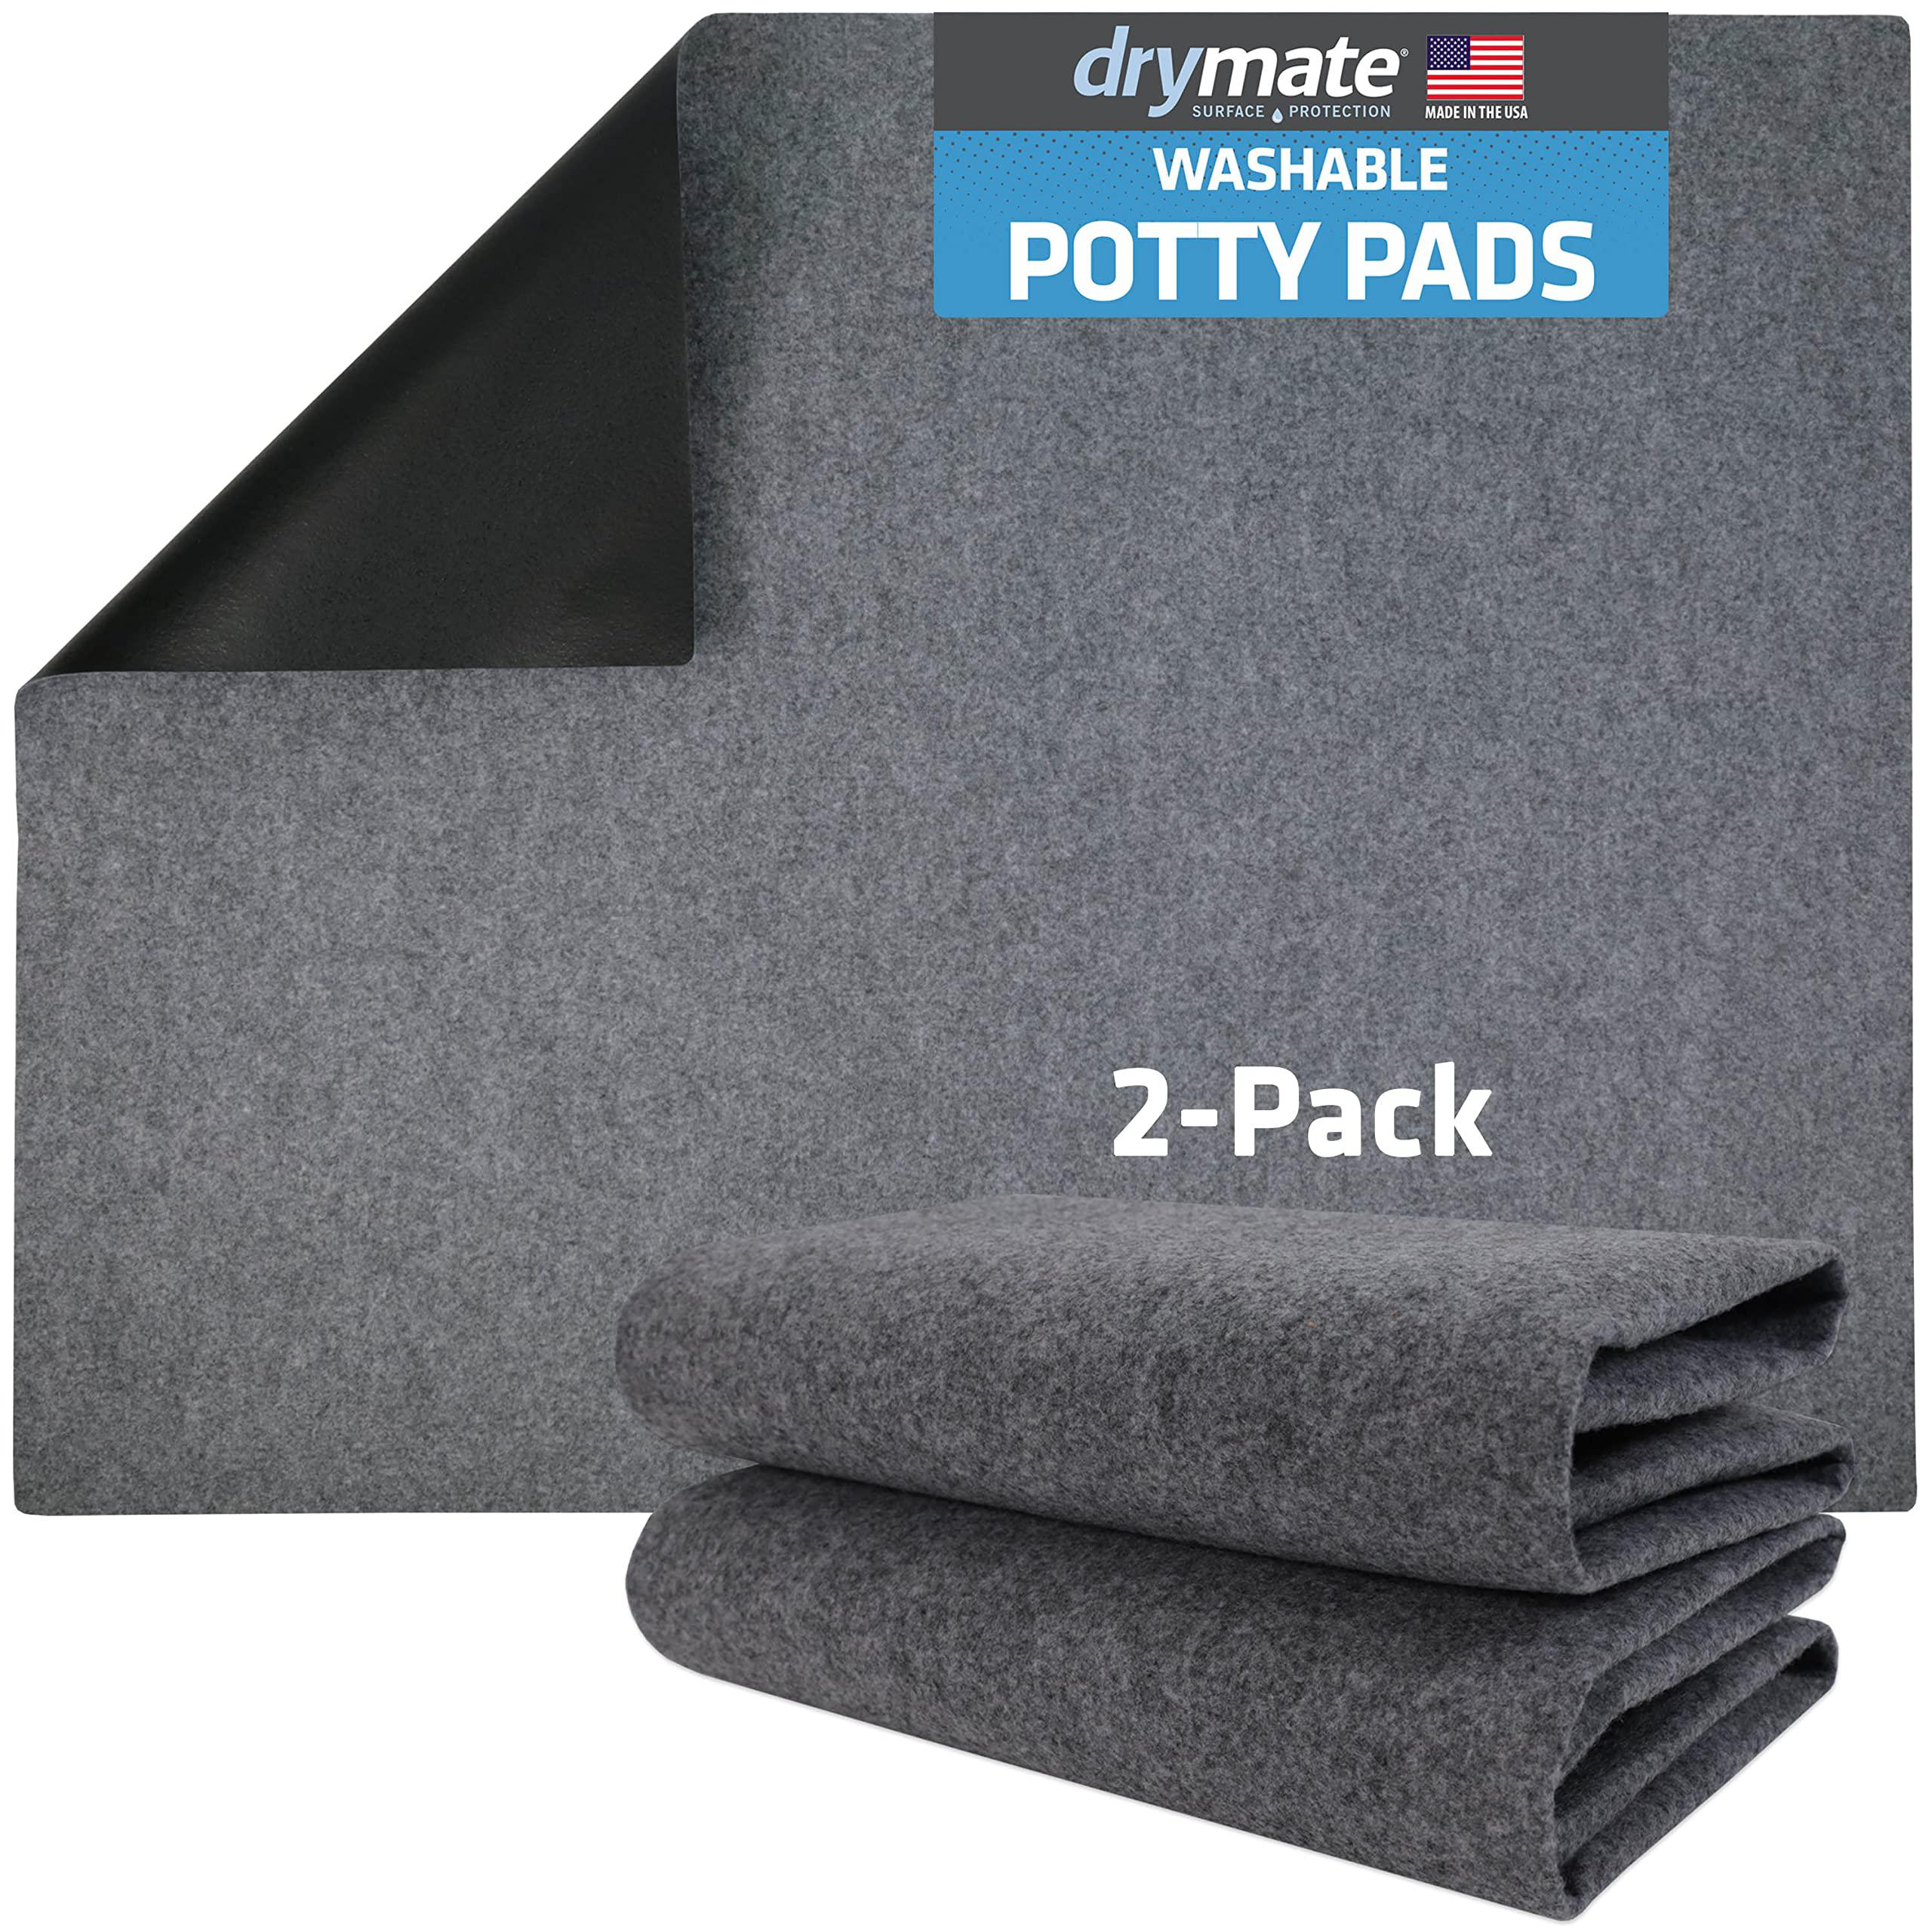 drymate washable pee pads for dogs (2-pack), waterproof, absorbent, non-slip, reusable pet training potty puppy mats, housebr